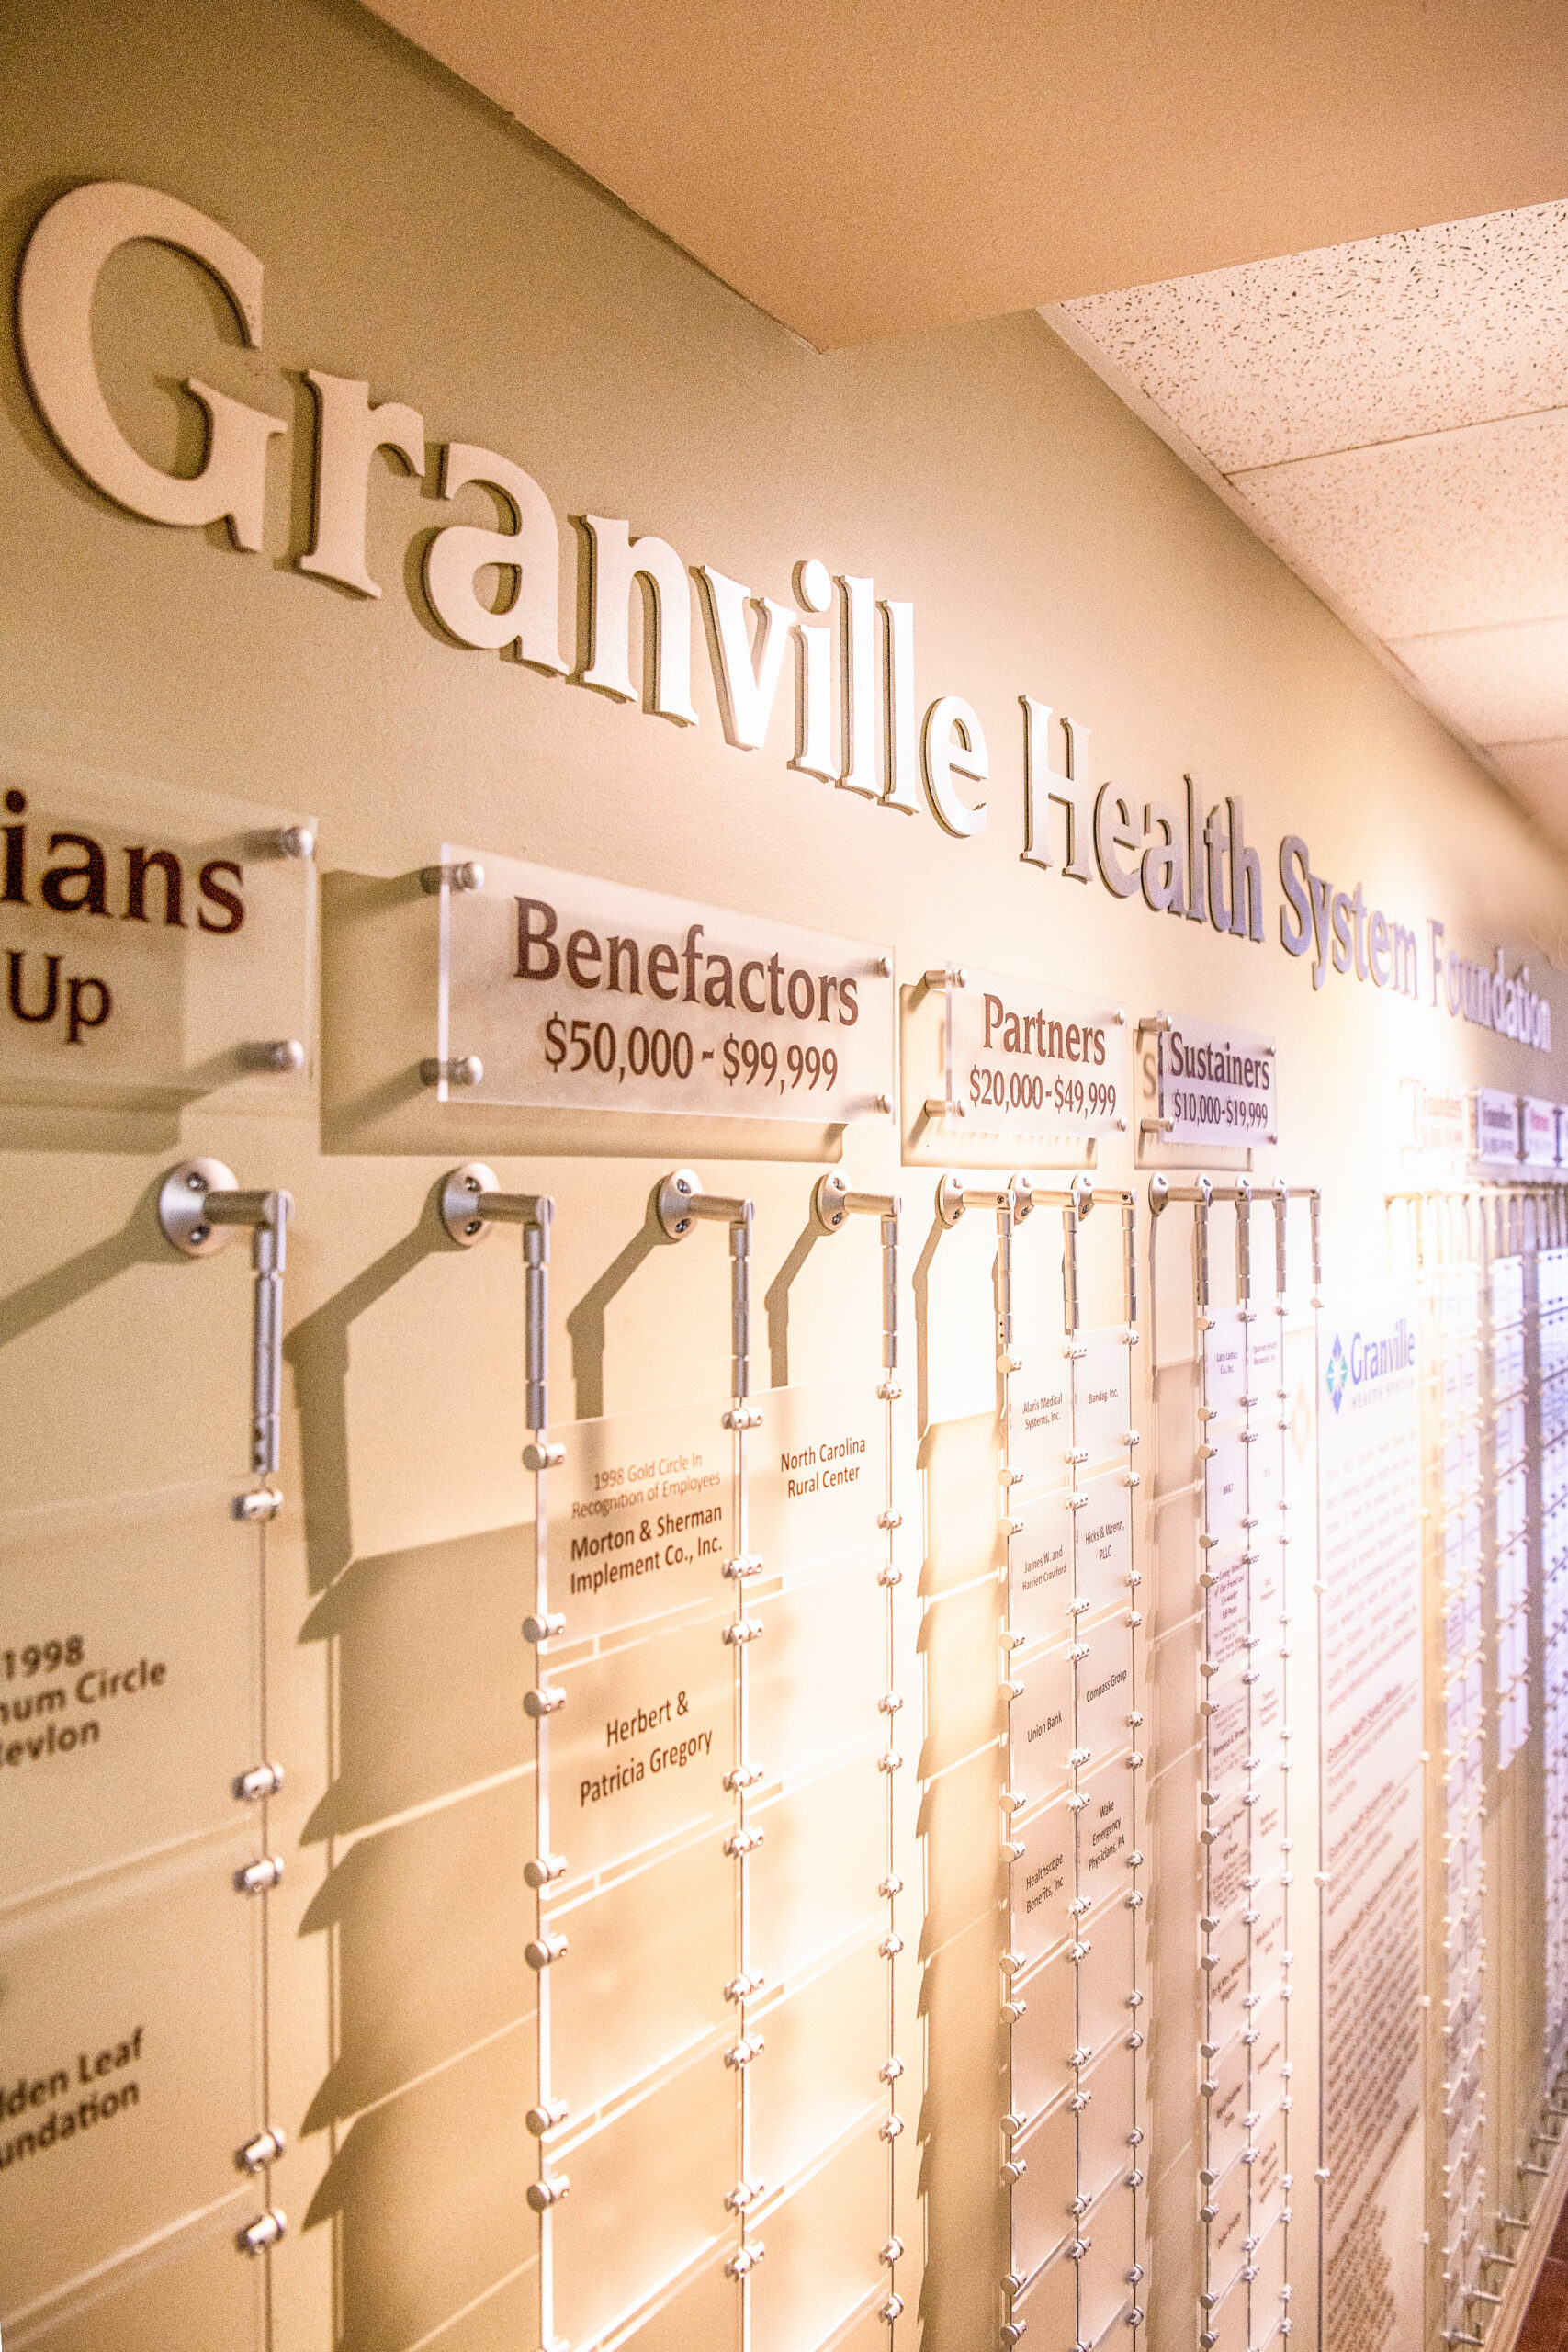 Granville Health System's Giving Wall showing names of donors